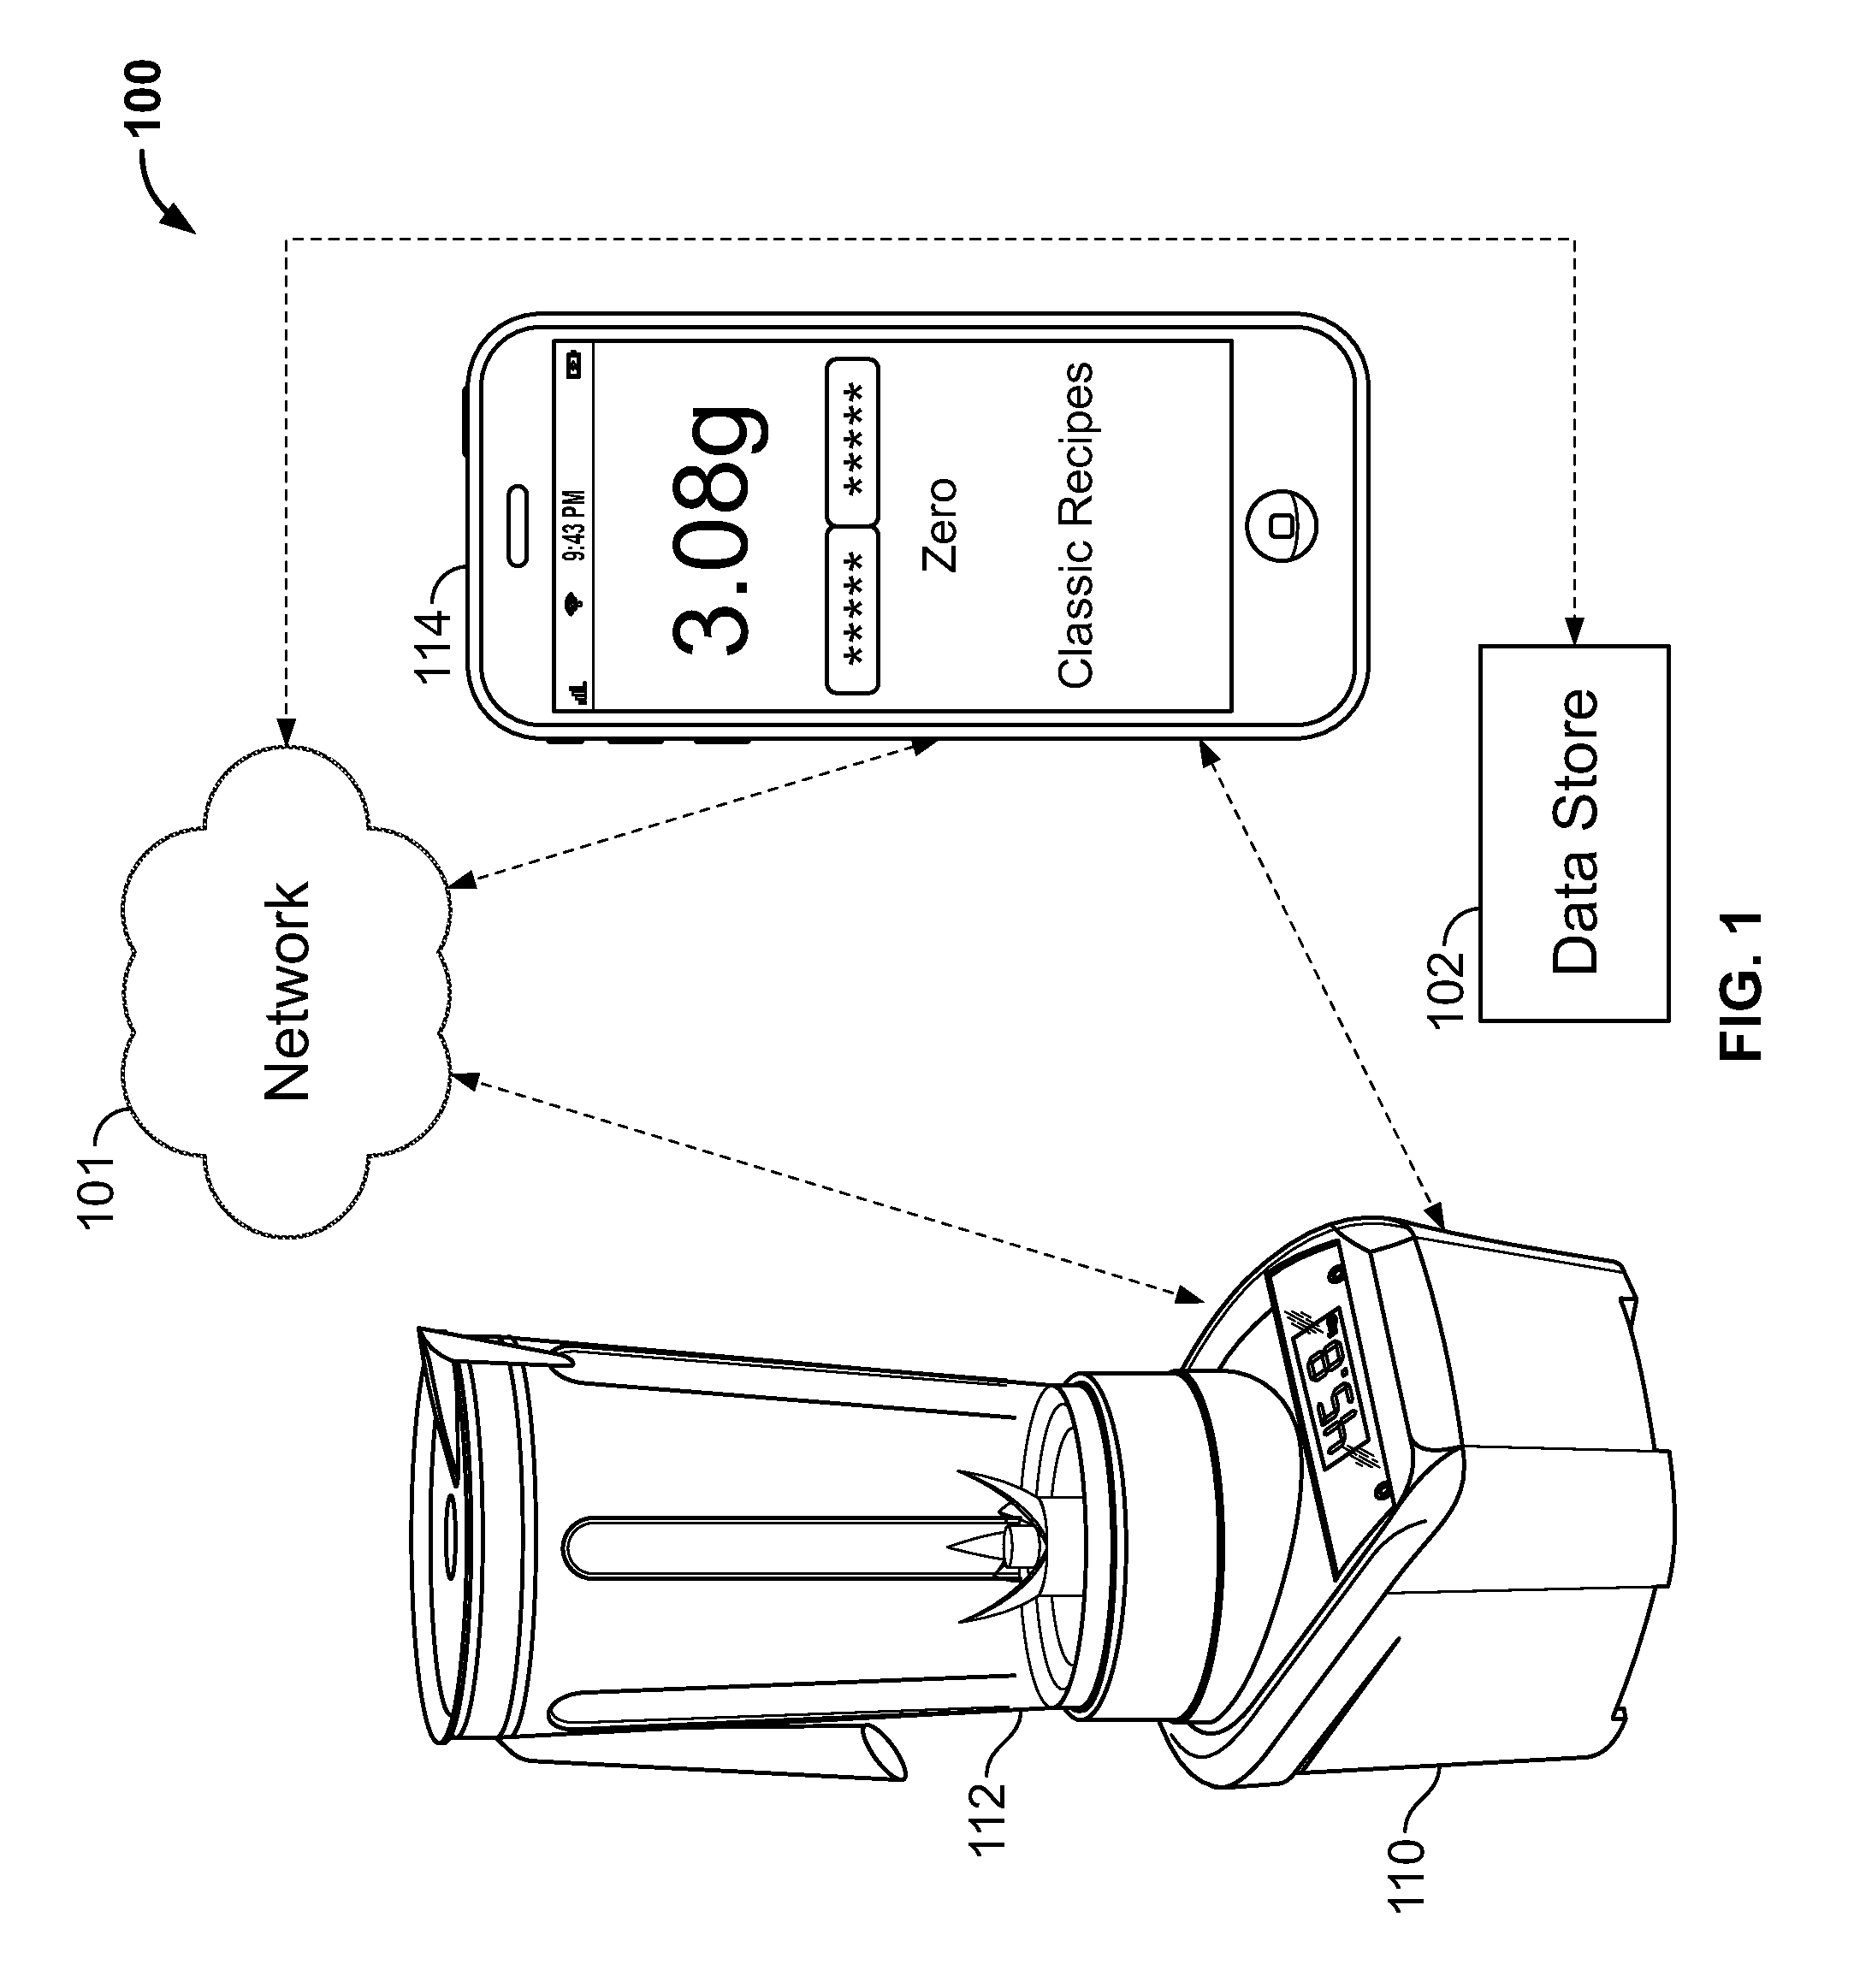 Food preparation appliance for use with a remote communication device